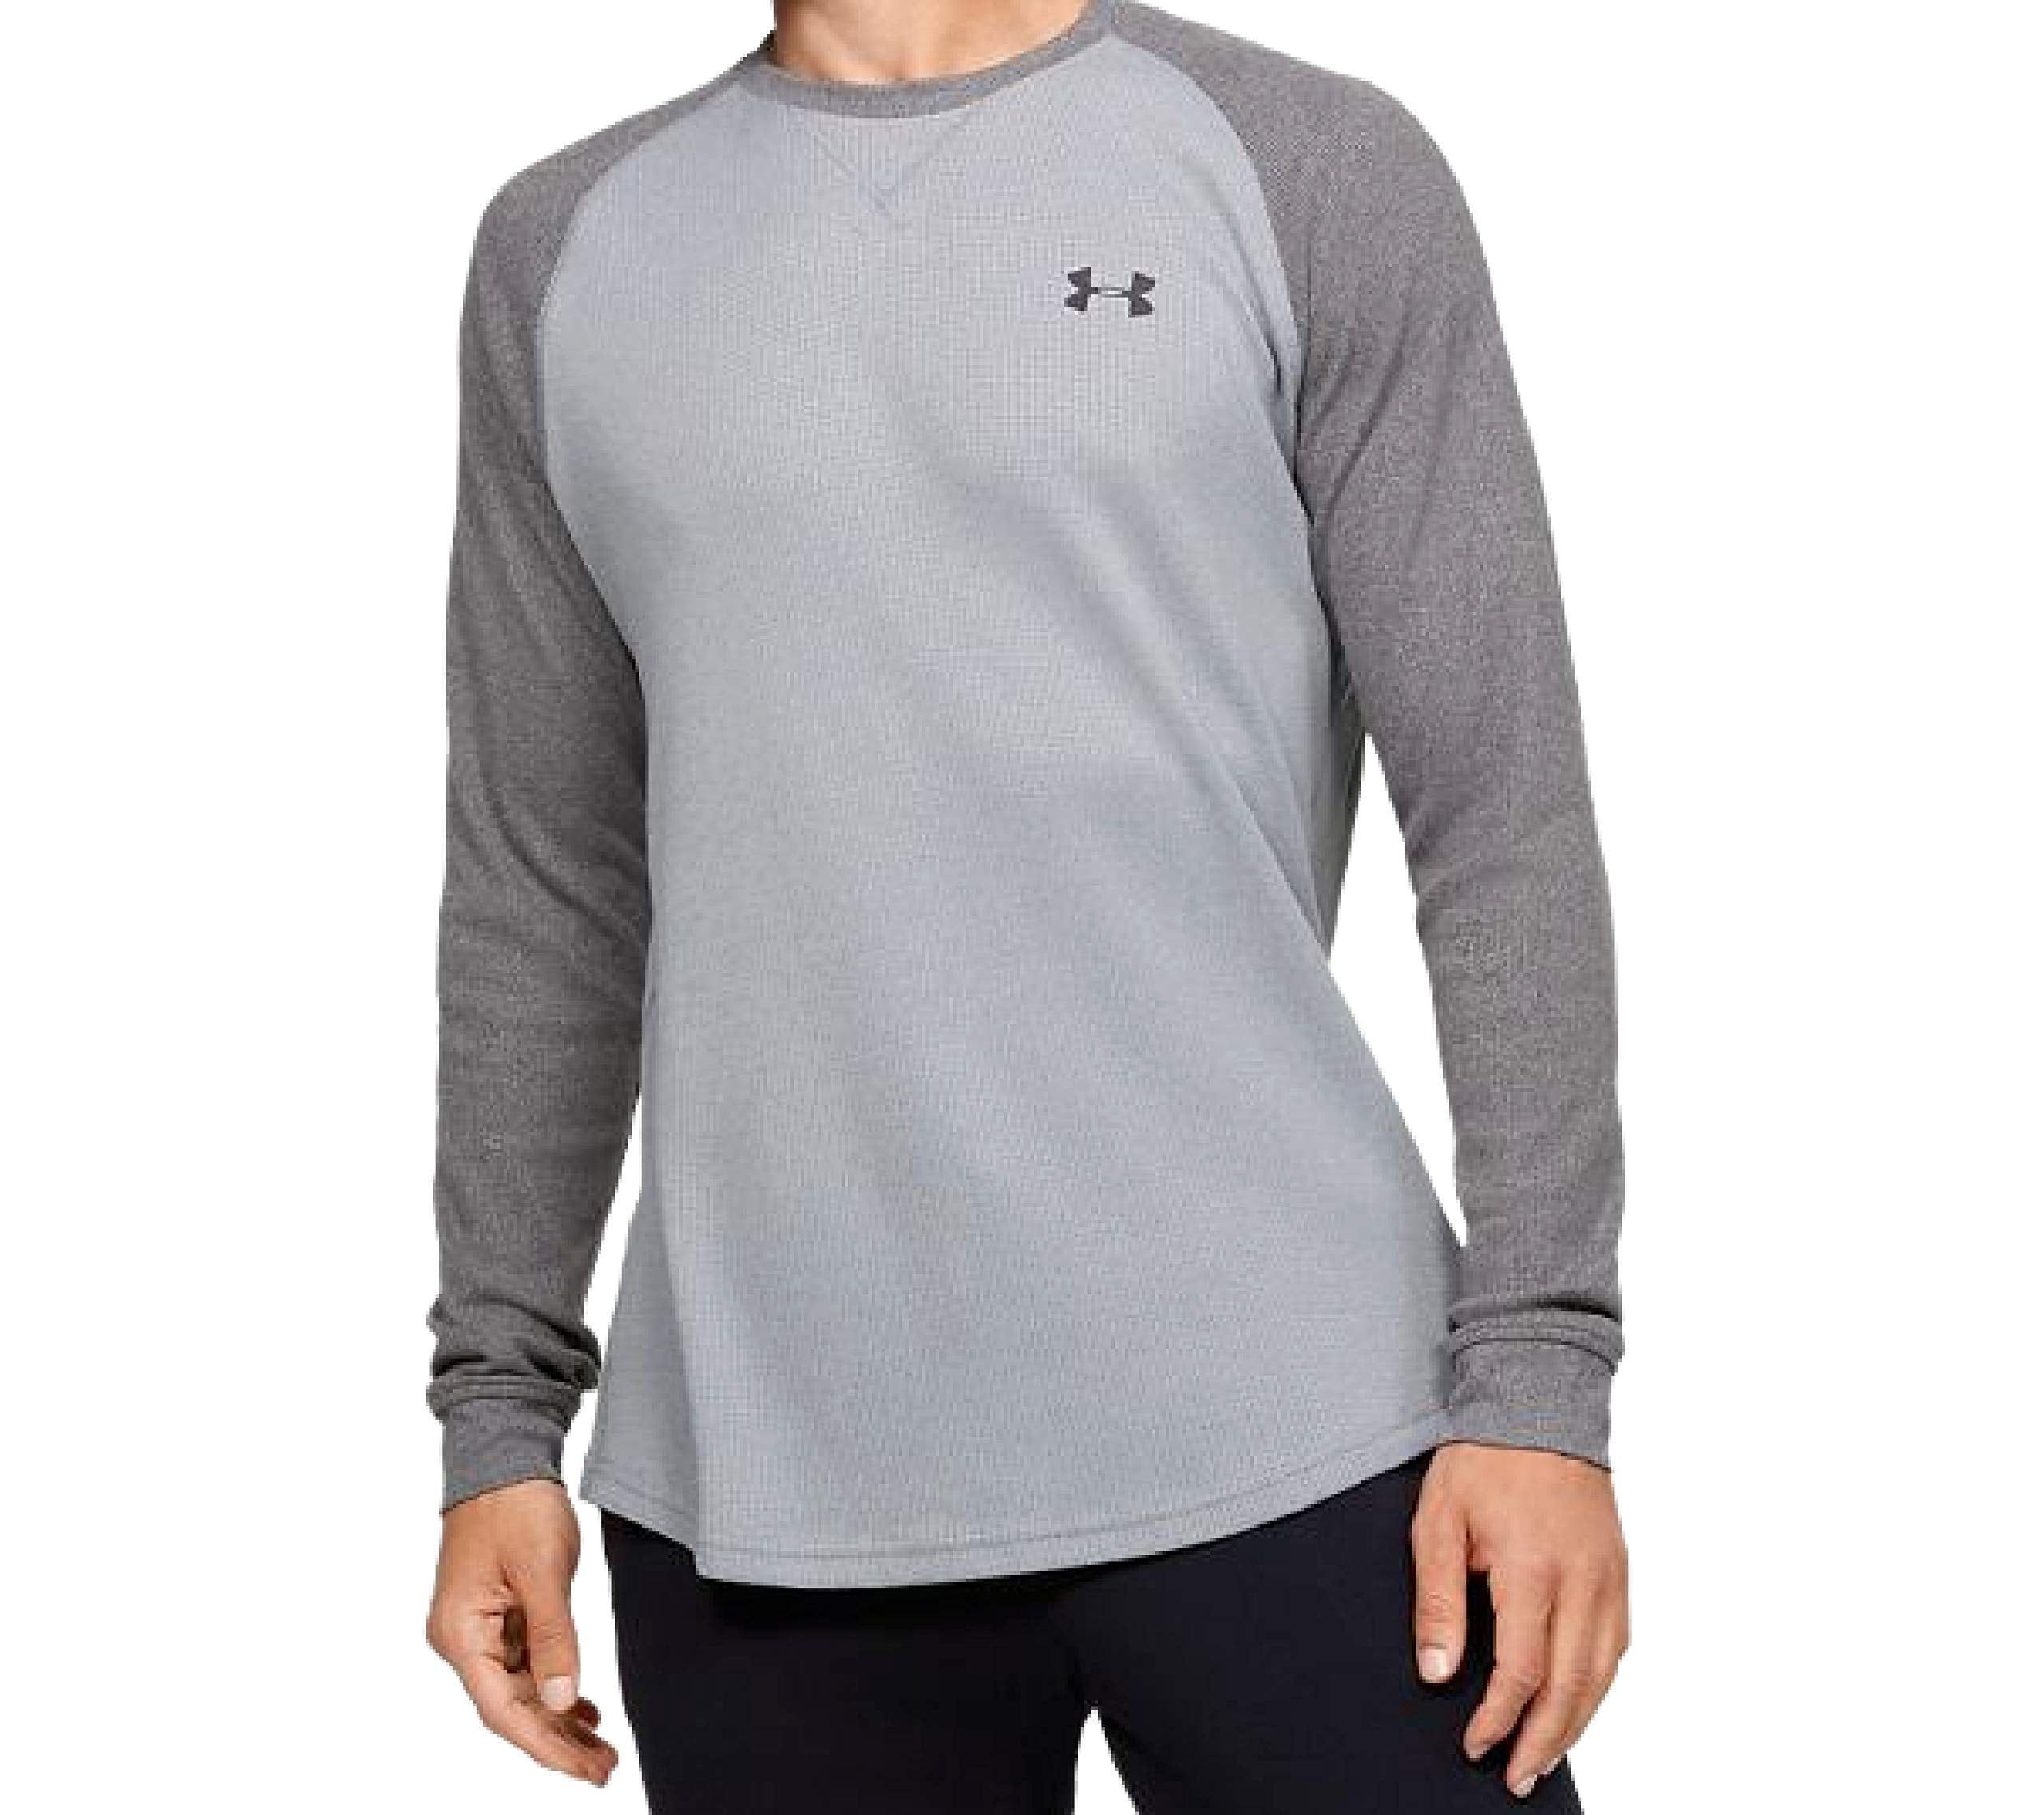  Under Armour Men's UA Waffle Crew Long Sleeve Shirt Top Cotton  Blend (Academy Blue 408, Small) : Clothing, Shoes & Jewelry